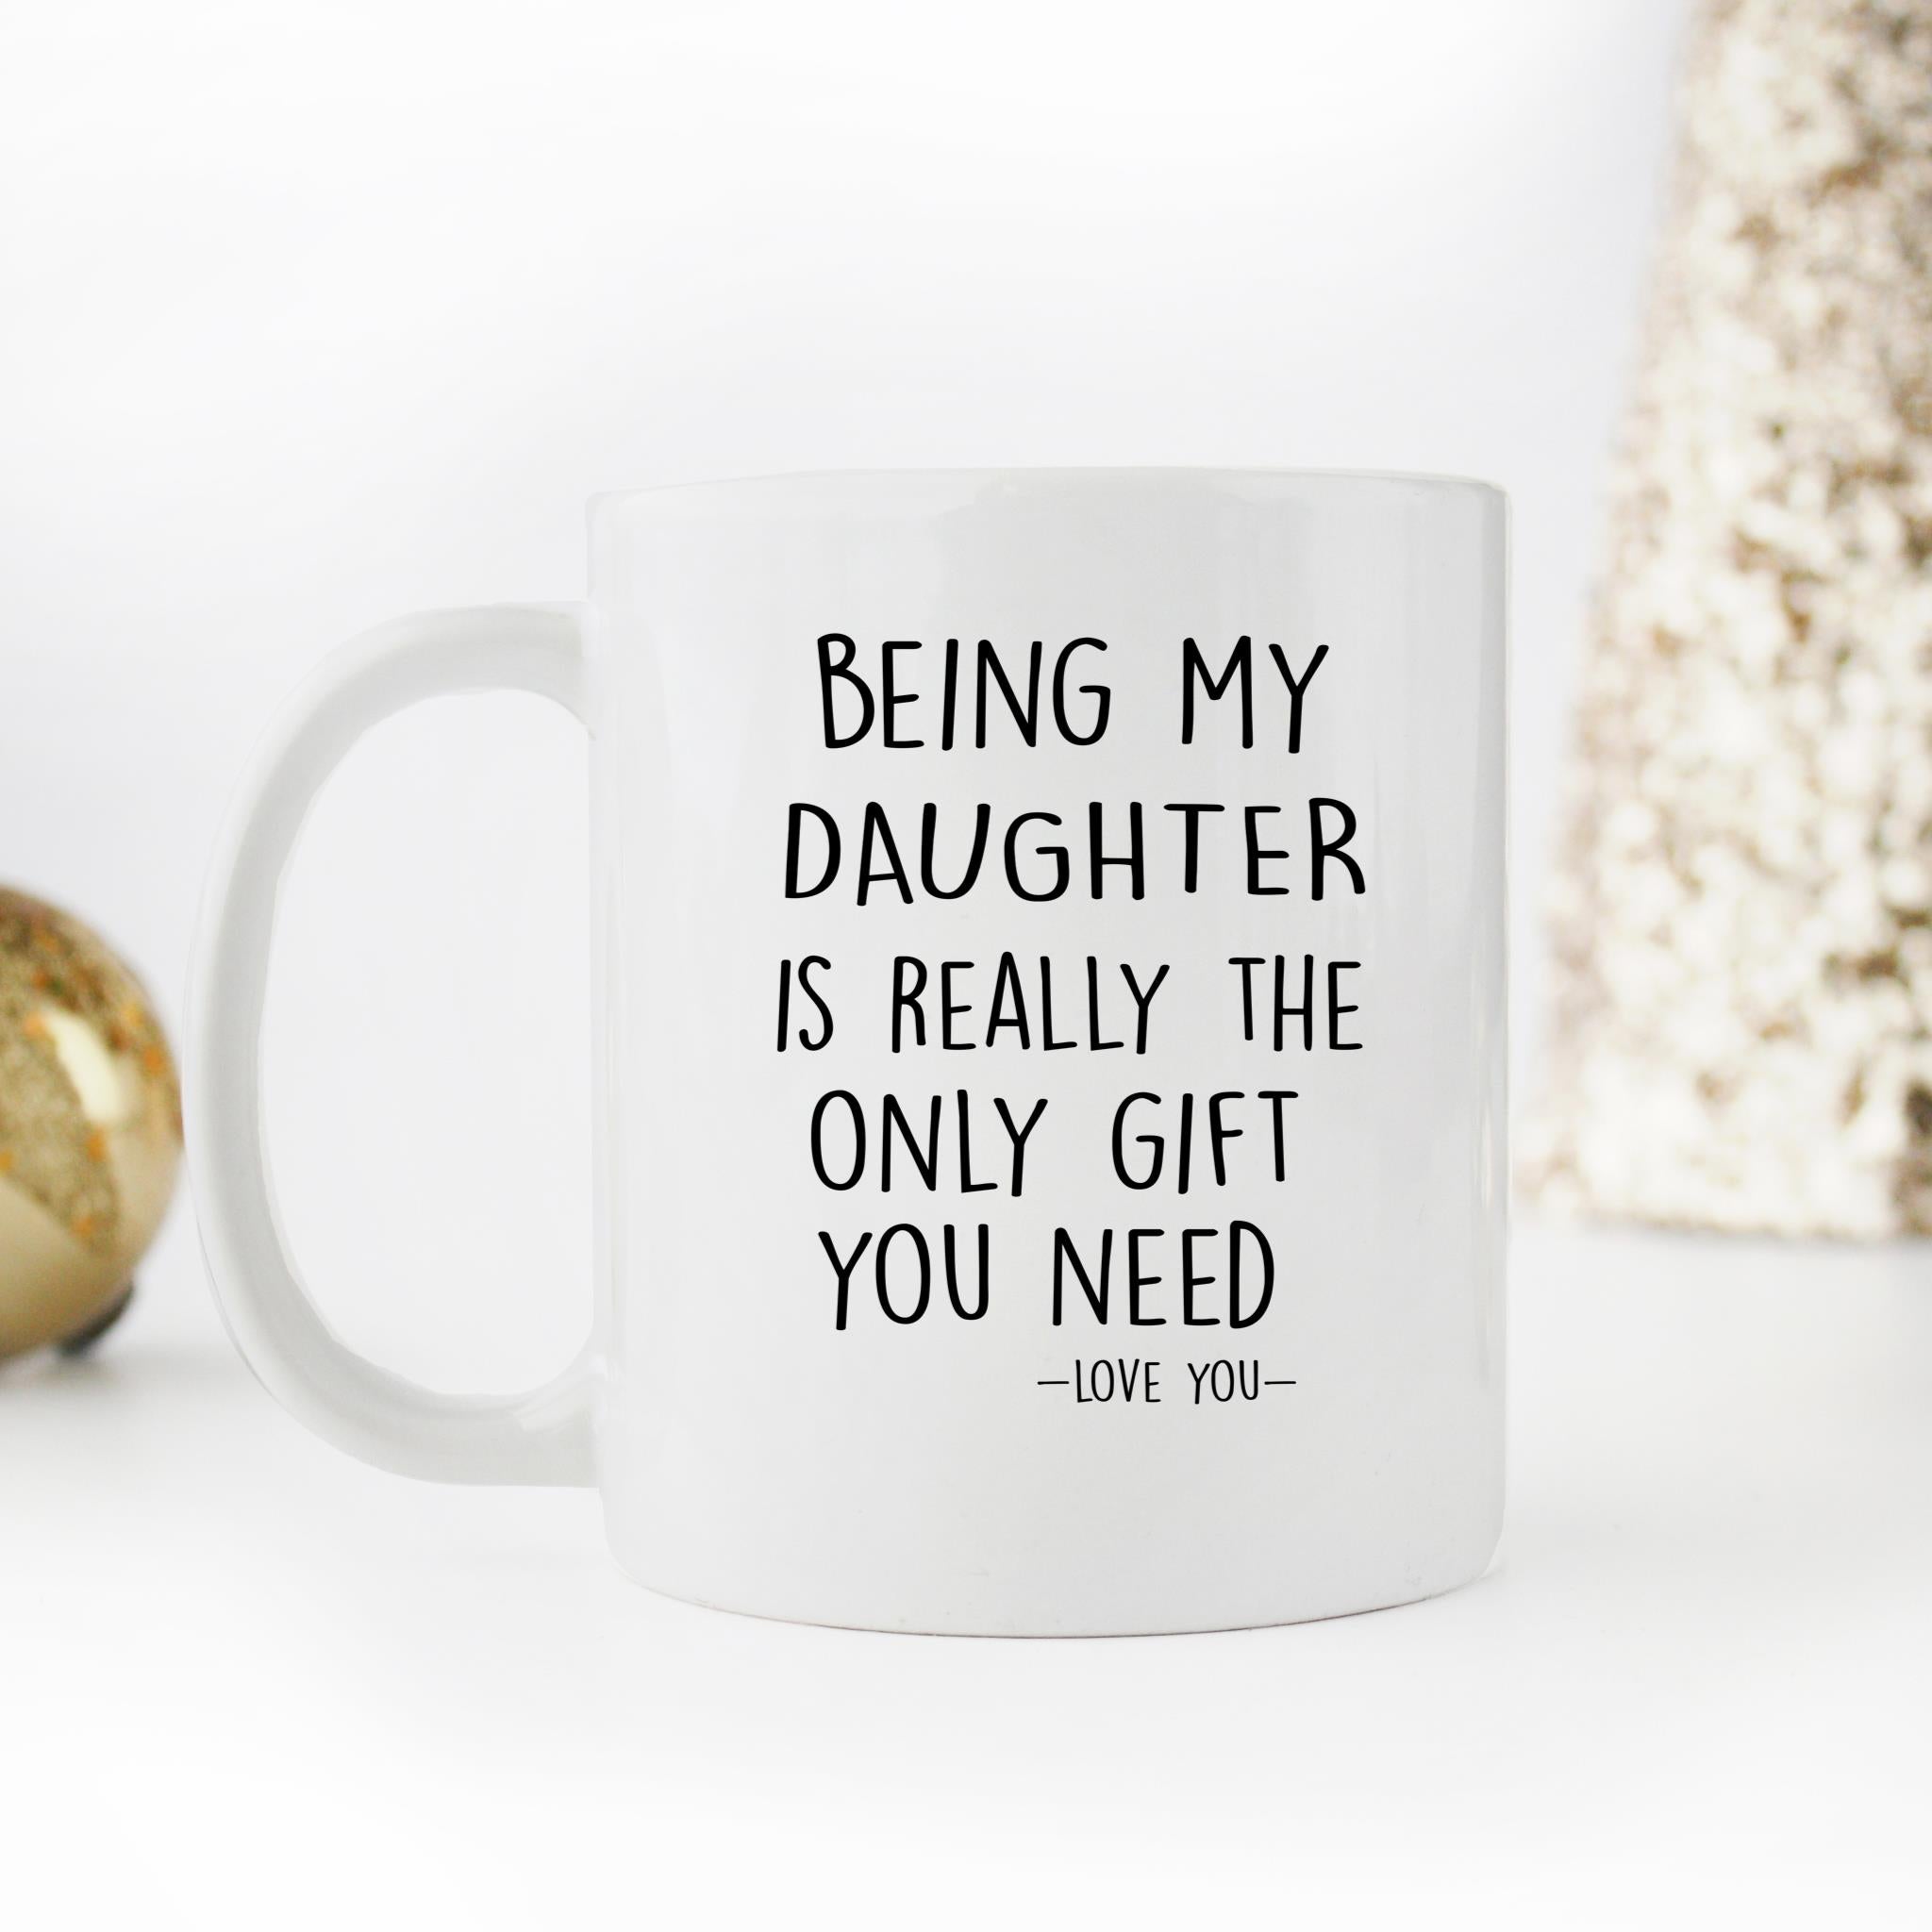 Skitongifts Funny Ceramic Novelty Coffee Mug Being My Daughter Is Really The Only Gift You Need - Love You Daughter Funny Gift UttQdyl